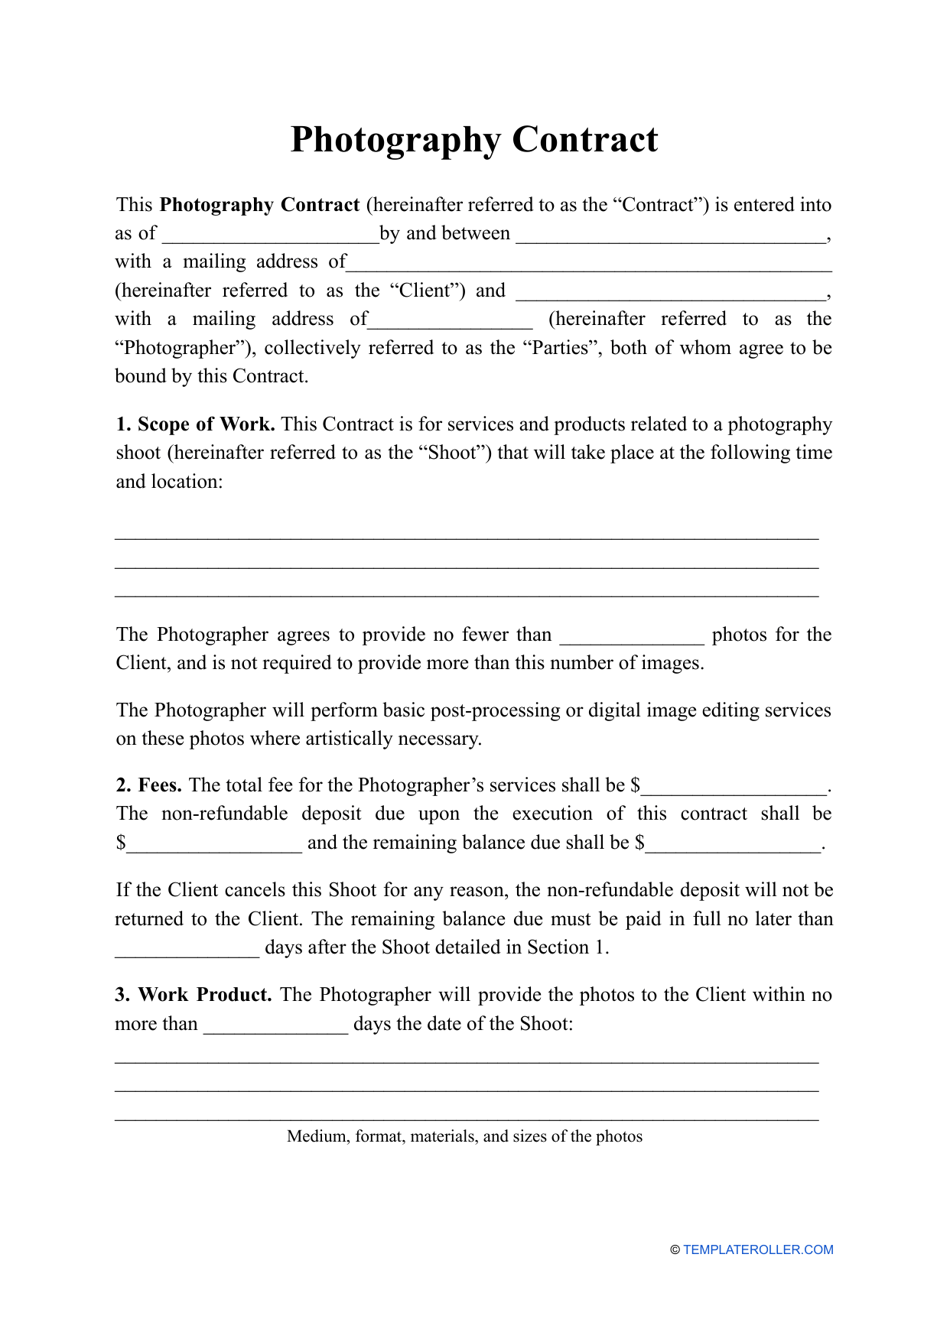 Photography Contract Template, Page 1